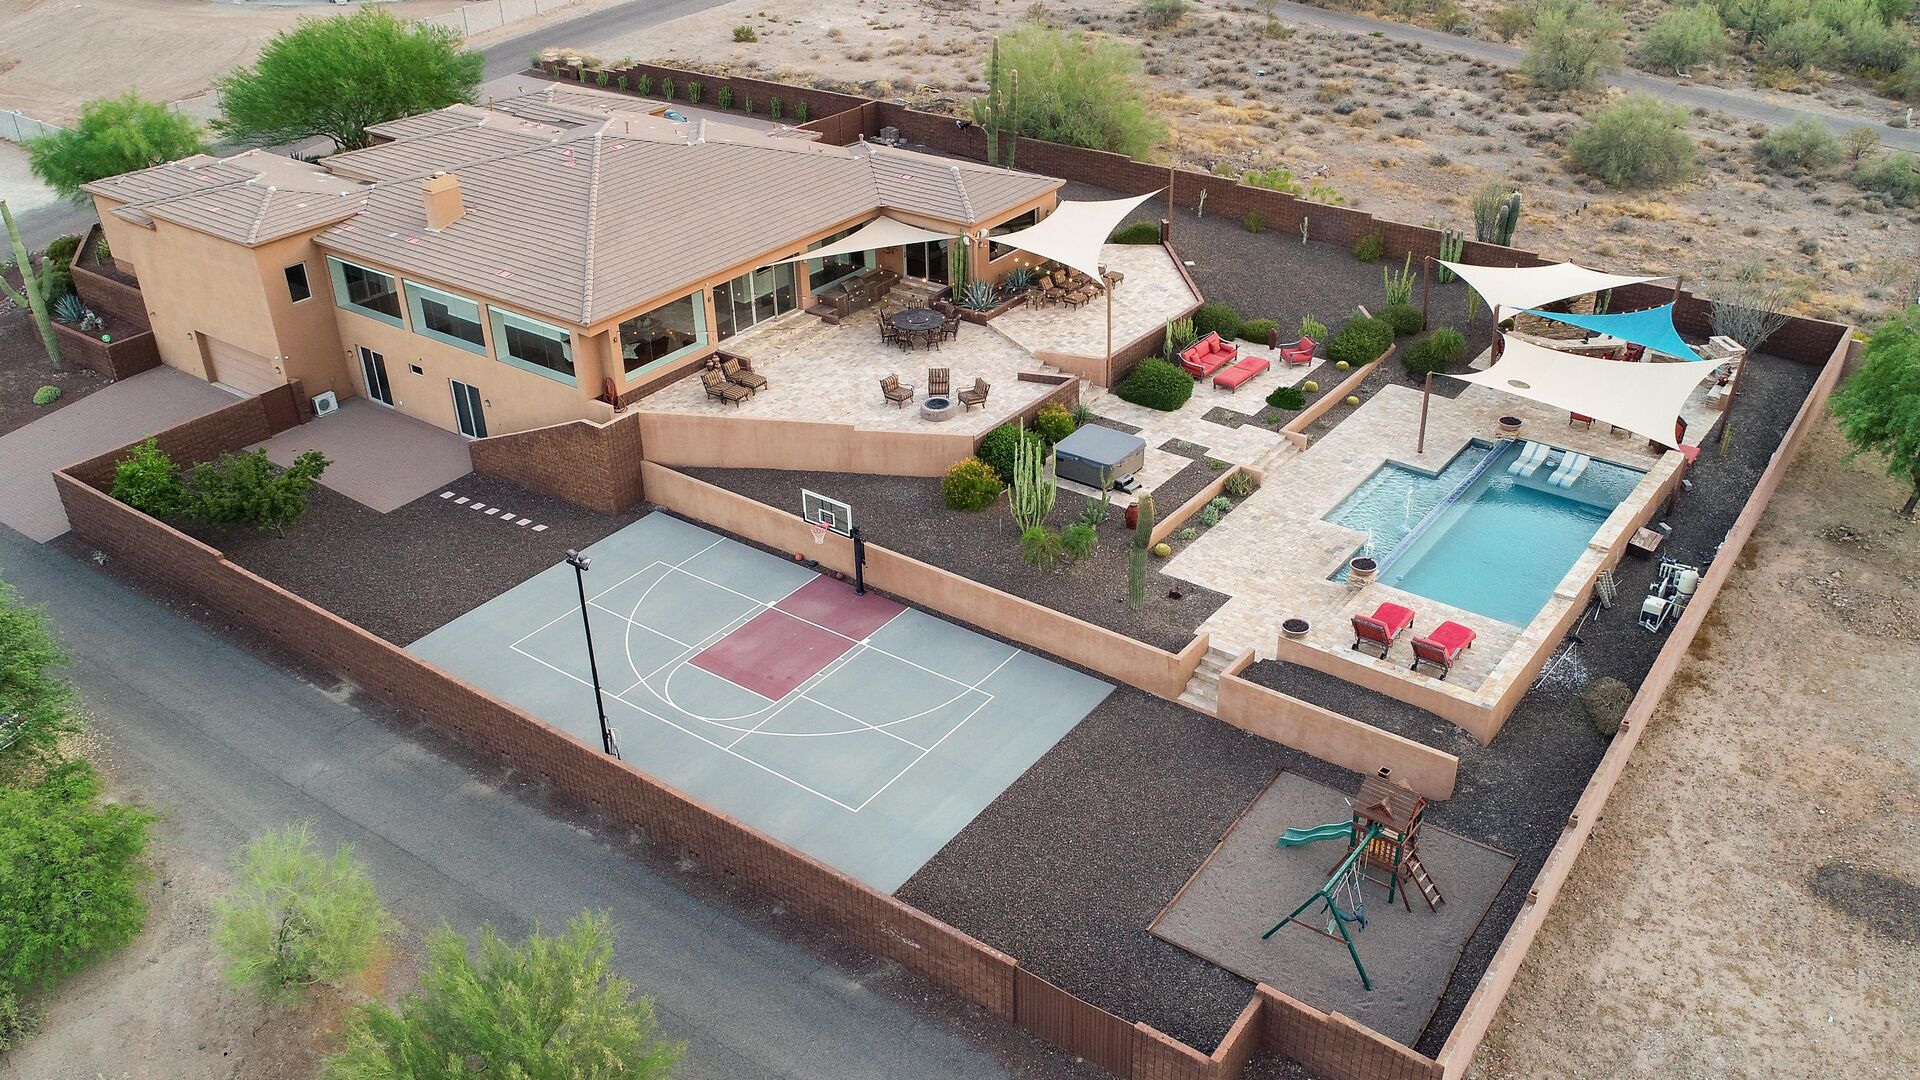 Aerial Photo of Desert Estate - The playground is no longer available